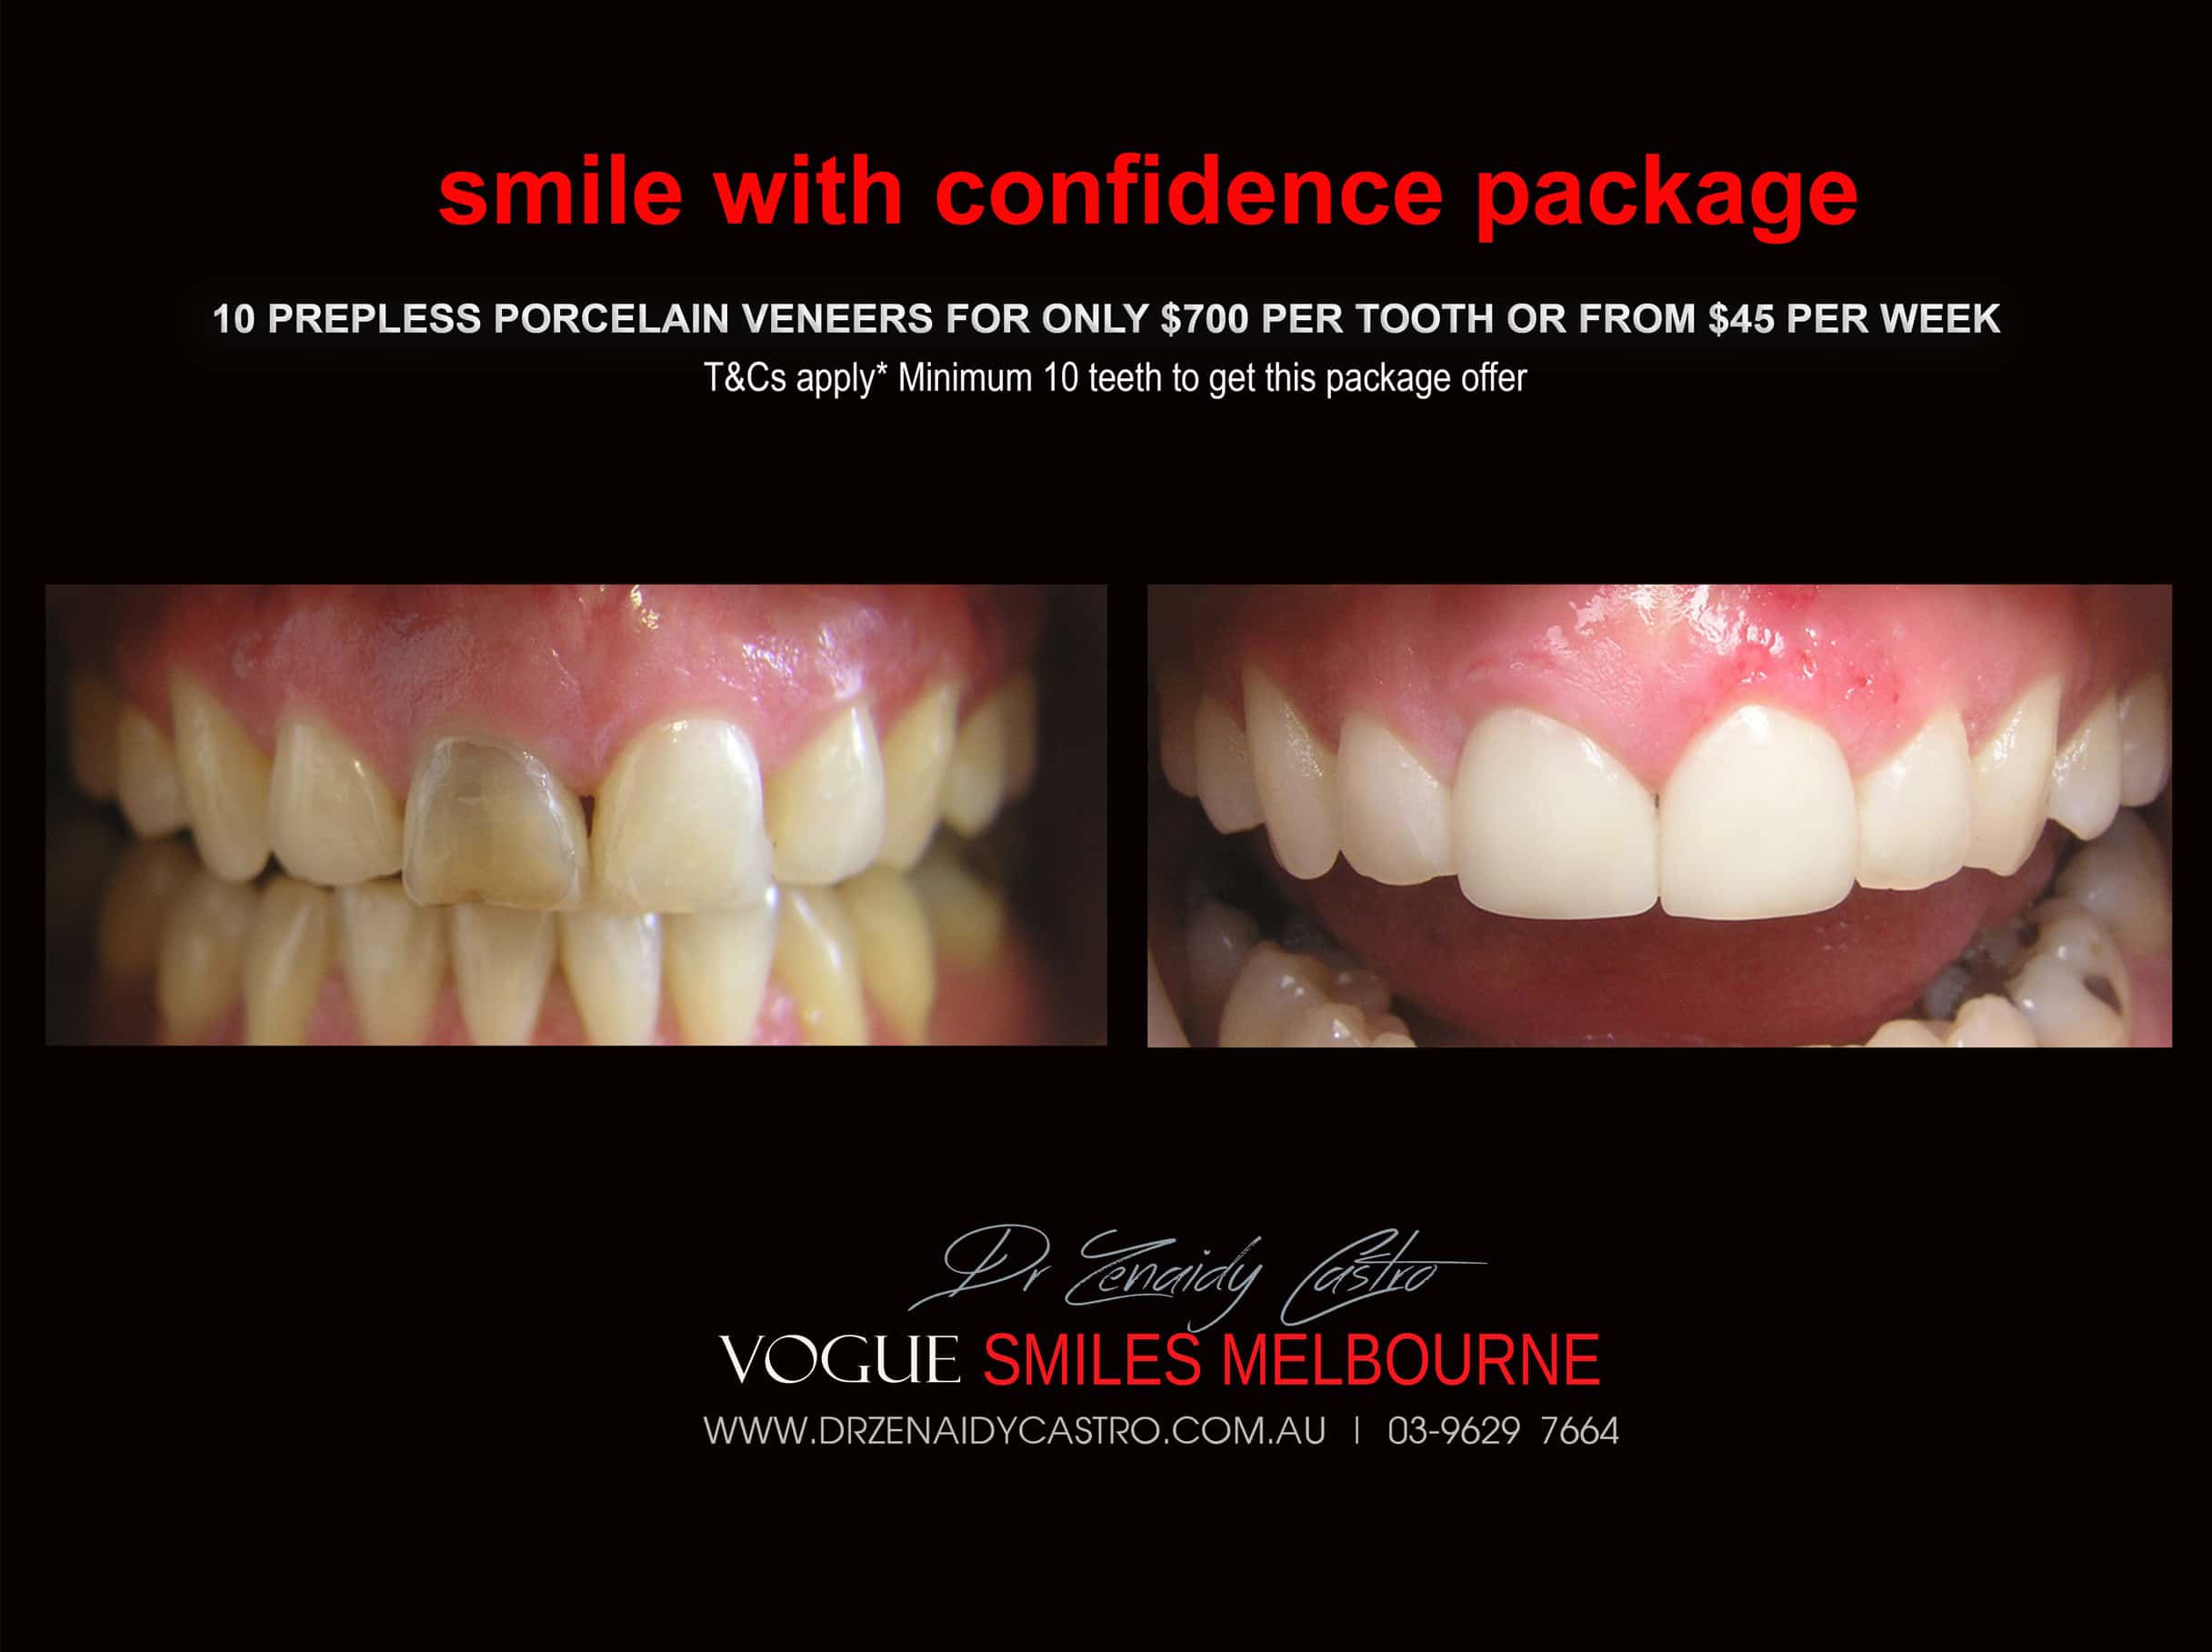 Black Tooth treatment- Dead Front tooth Treatment With Porcelain Veneers Melbourne CBD Cosmetic Dentist